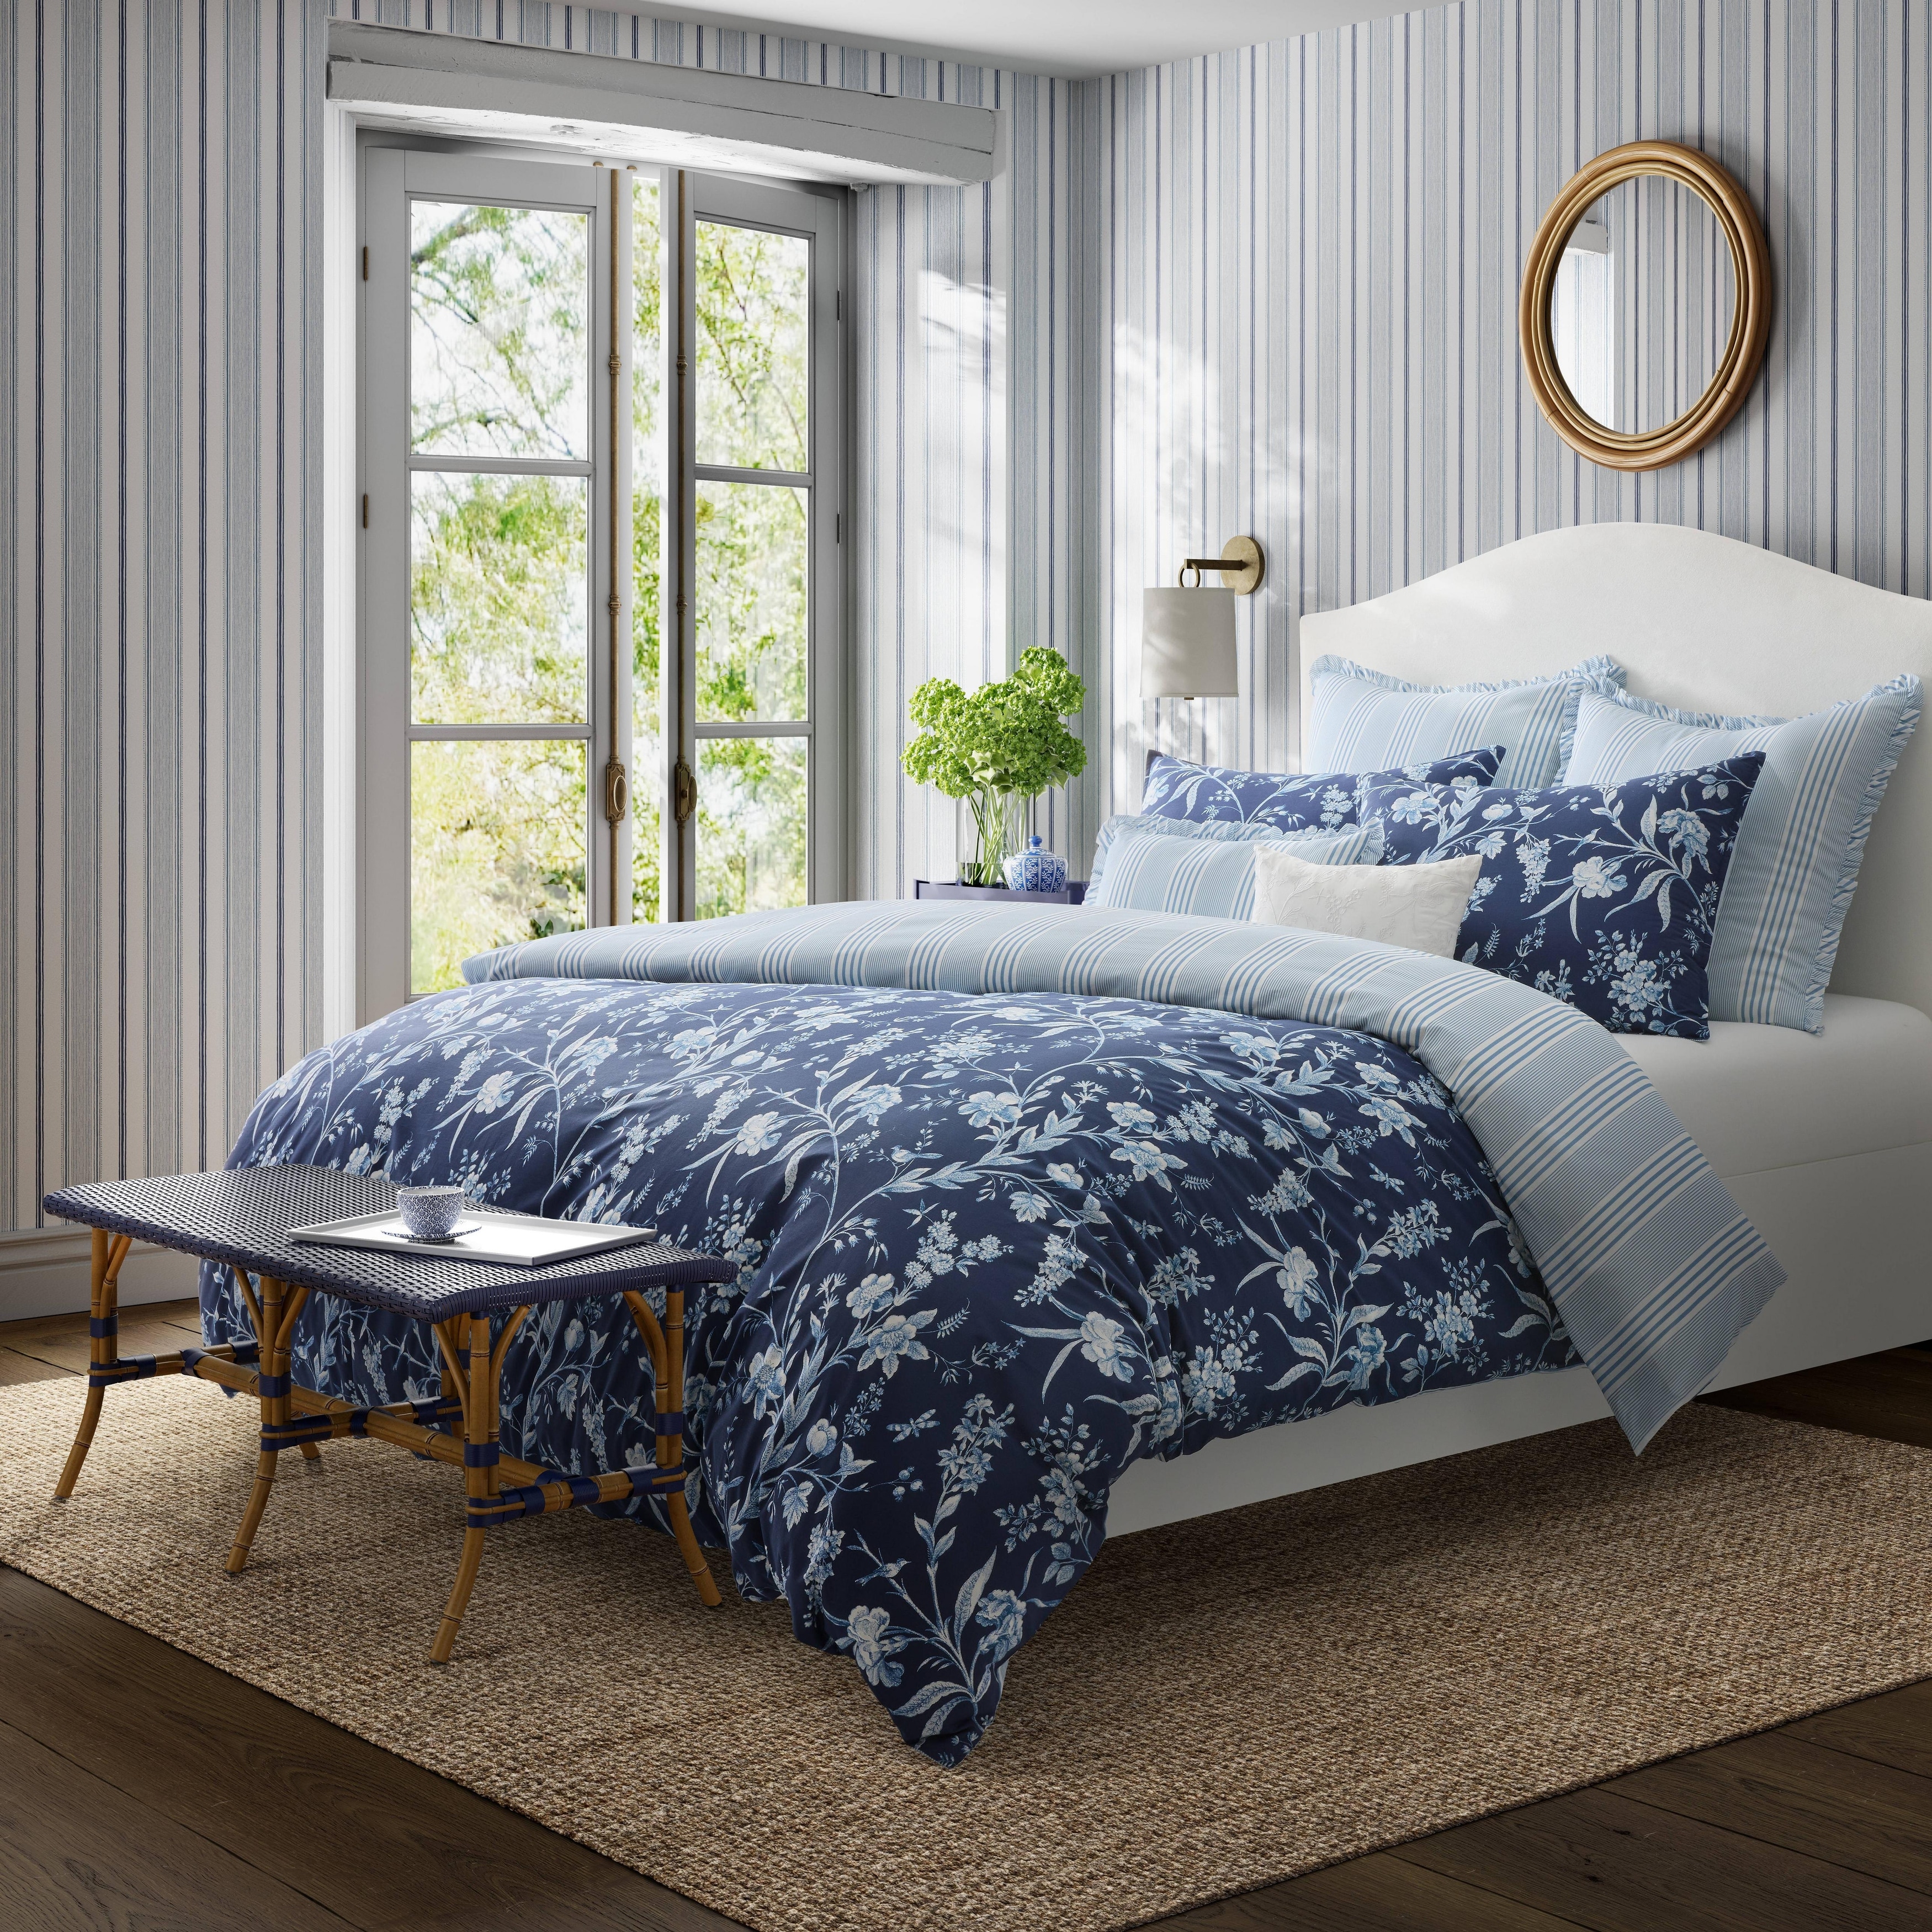 Laura Ashley Comforters and Sets - Bed Bath & Beyond